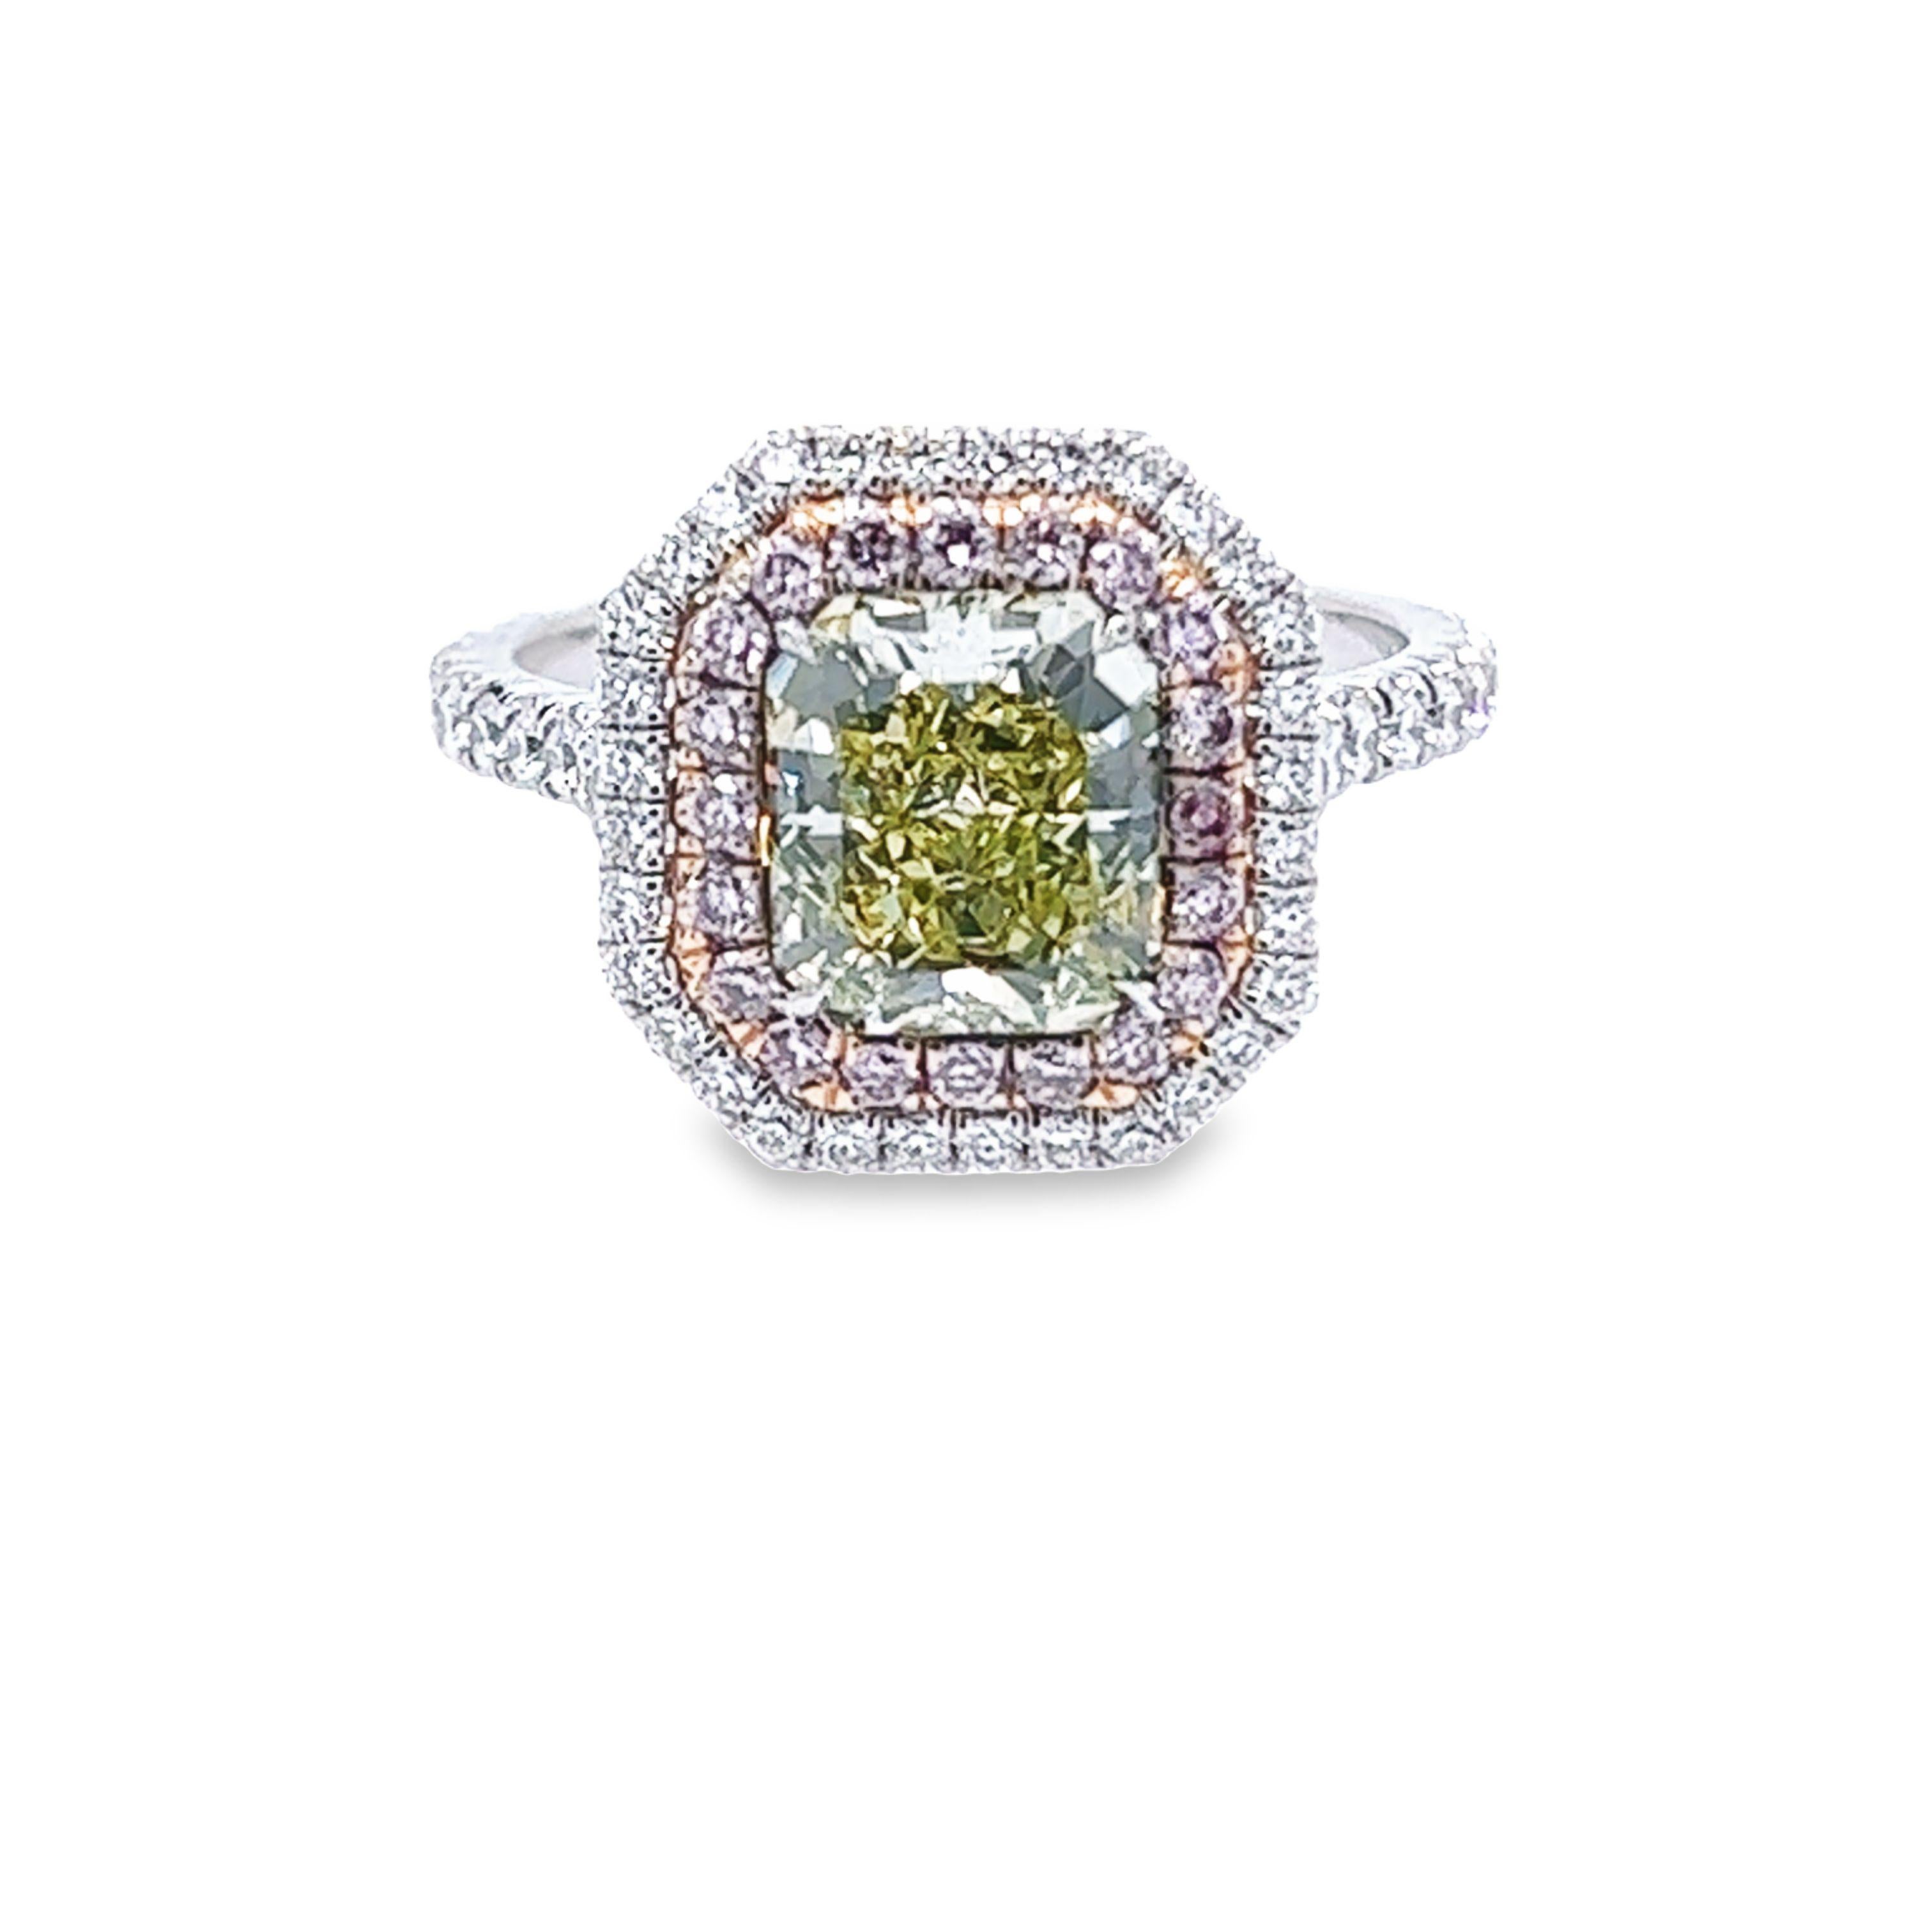 Rosenberg Diamonds & Co. 2.07 carat Radiant cut  Fancy Green Yellow VS1 clarity is accompanied by a GIA certificate. This beautiful Radiant is set in a handmade platinum setting and completes the look with a beautiful double halo of .80 carat total